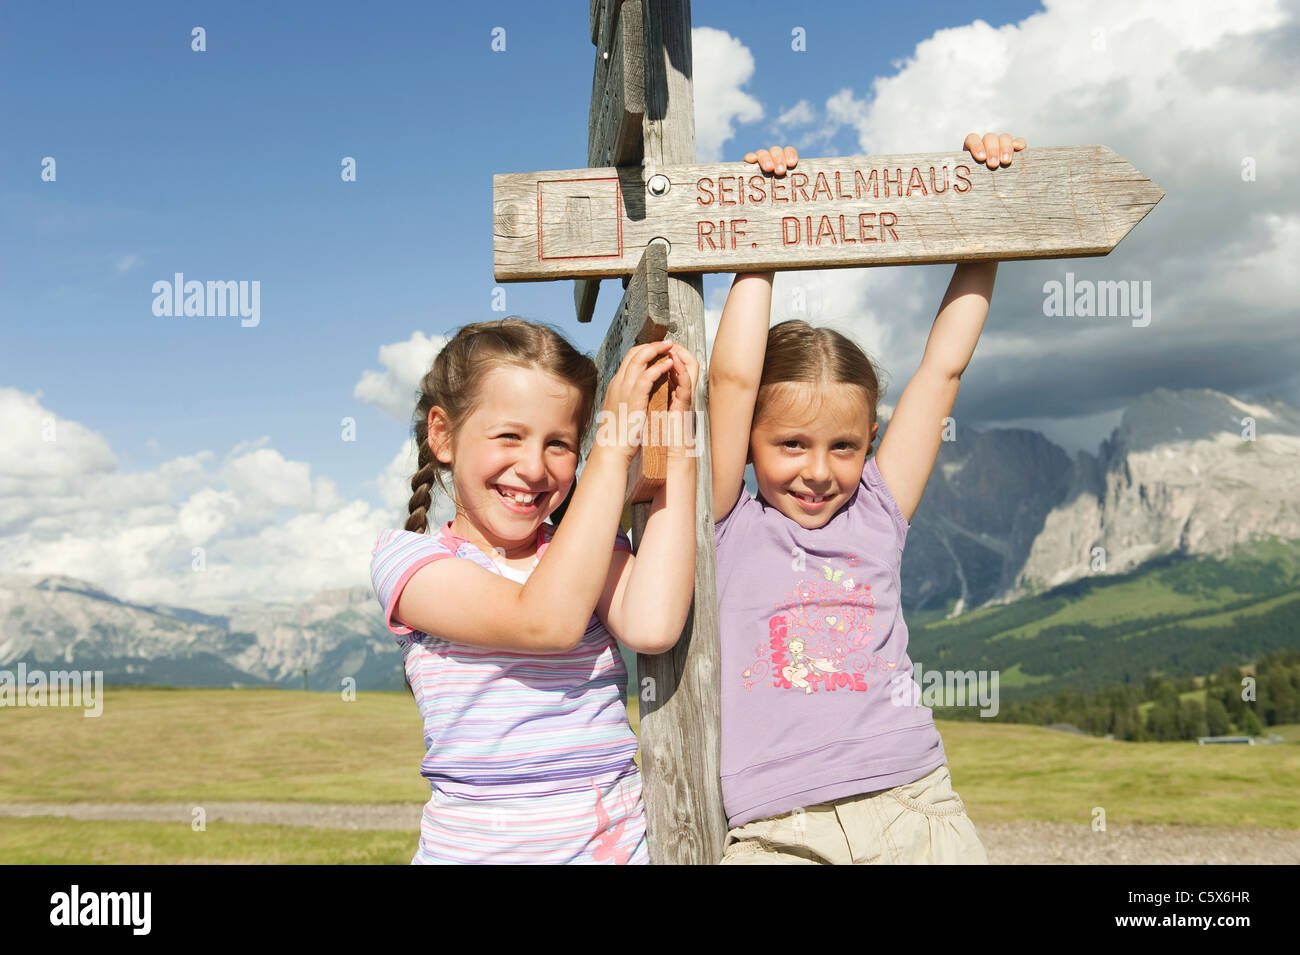 Italy, Seiseralm, Girls (6-7), (8-9) standing by sign post, smiling, portrait Stock Photo